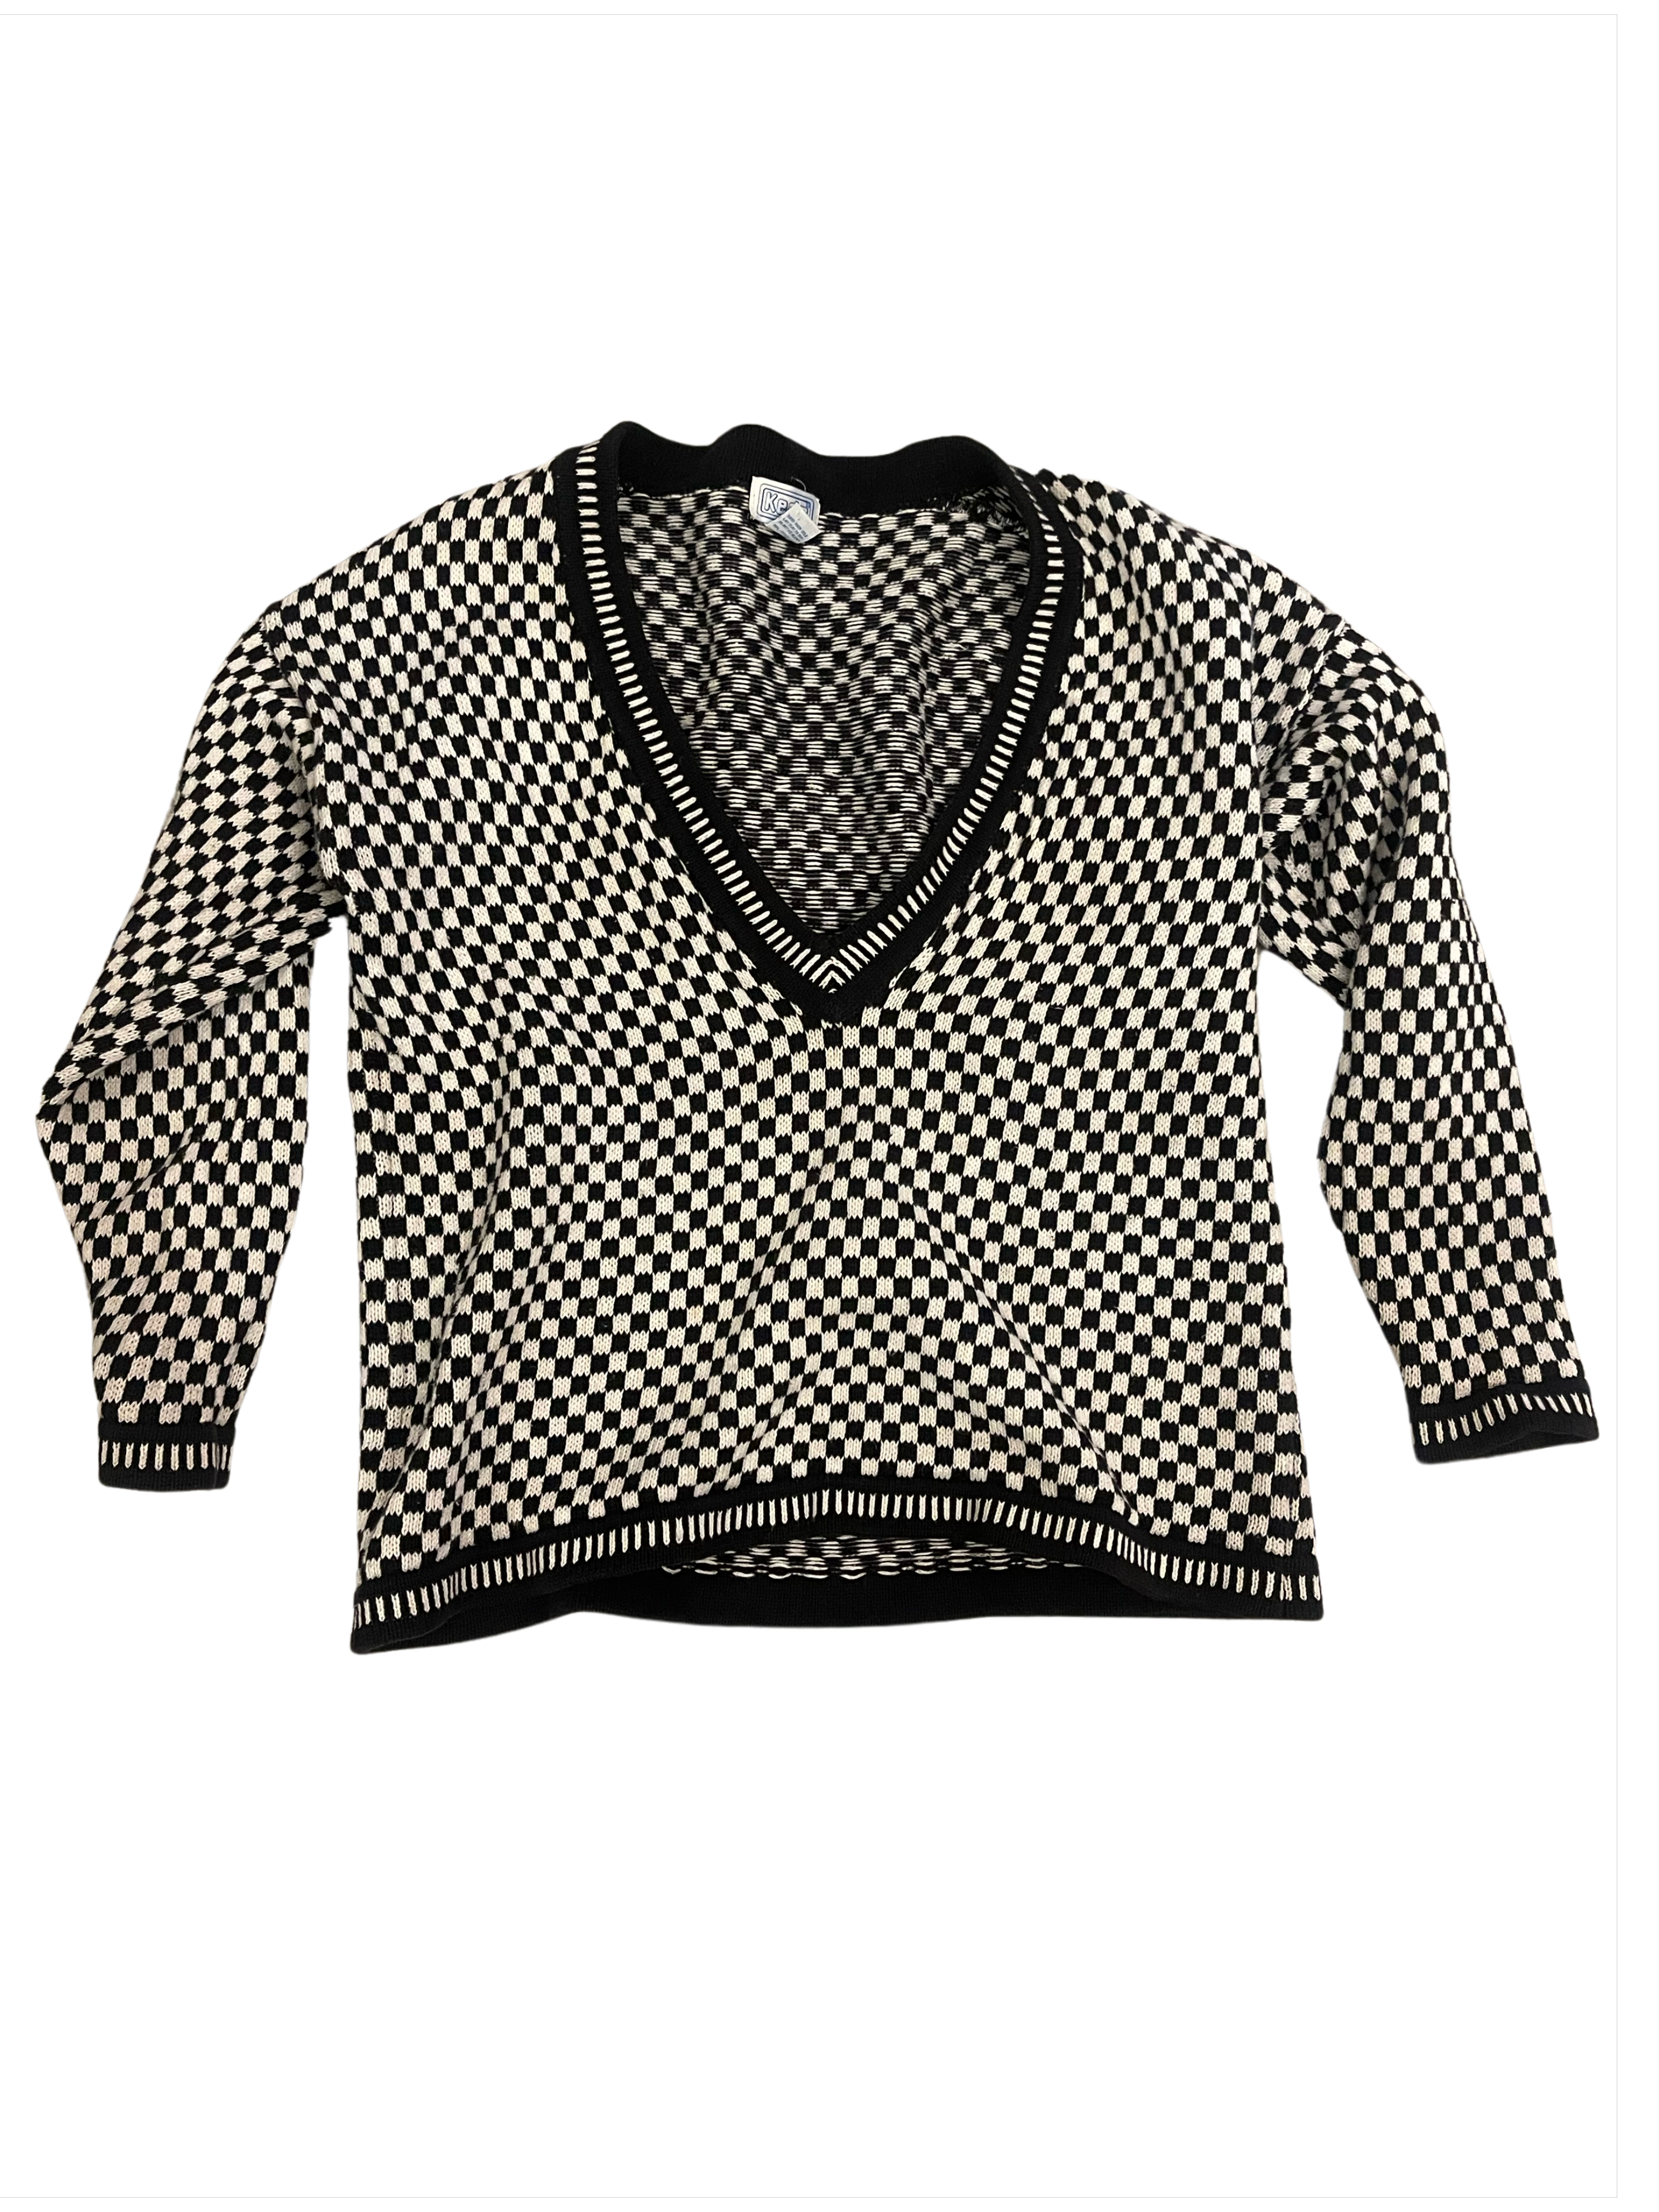 Vintage Keds Classic Black and White Checkered Long V Neck Sweater